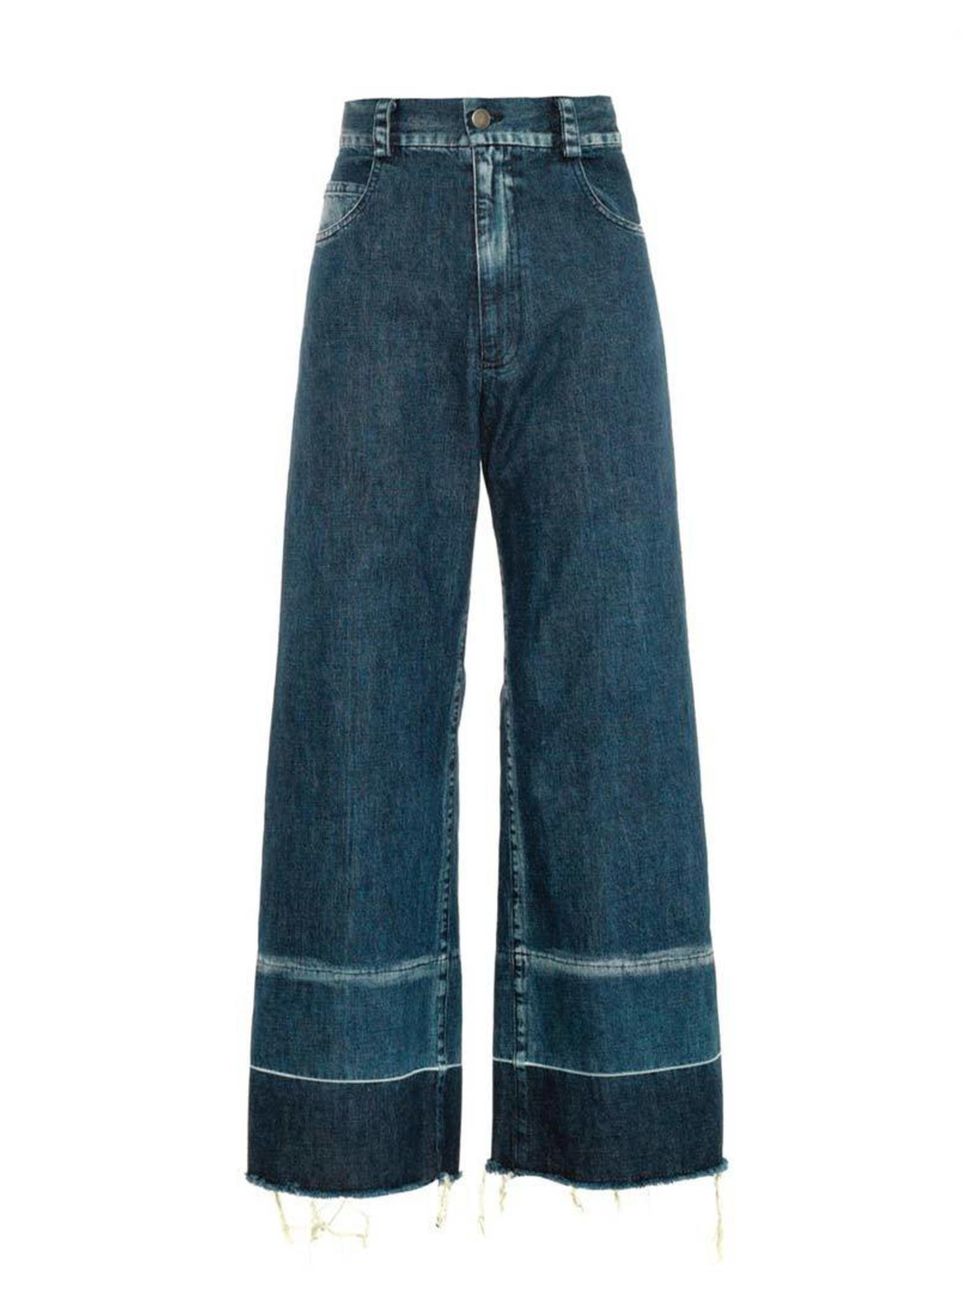 <p>Next season is all about denim. Upgrade yours early with a great pair of flares.</p>

<p>Rachel Comey jeans, £290 at <a href="http://www.matchesfashion.com/product/1006584" target="_blank">MatchesFashion.com</a></p>